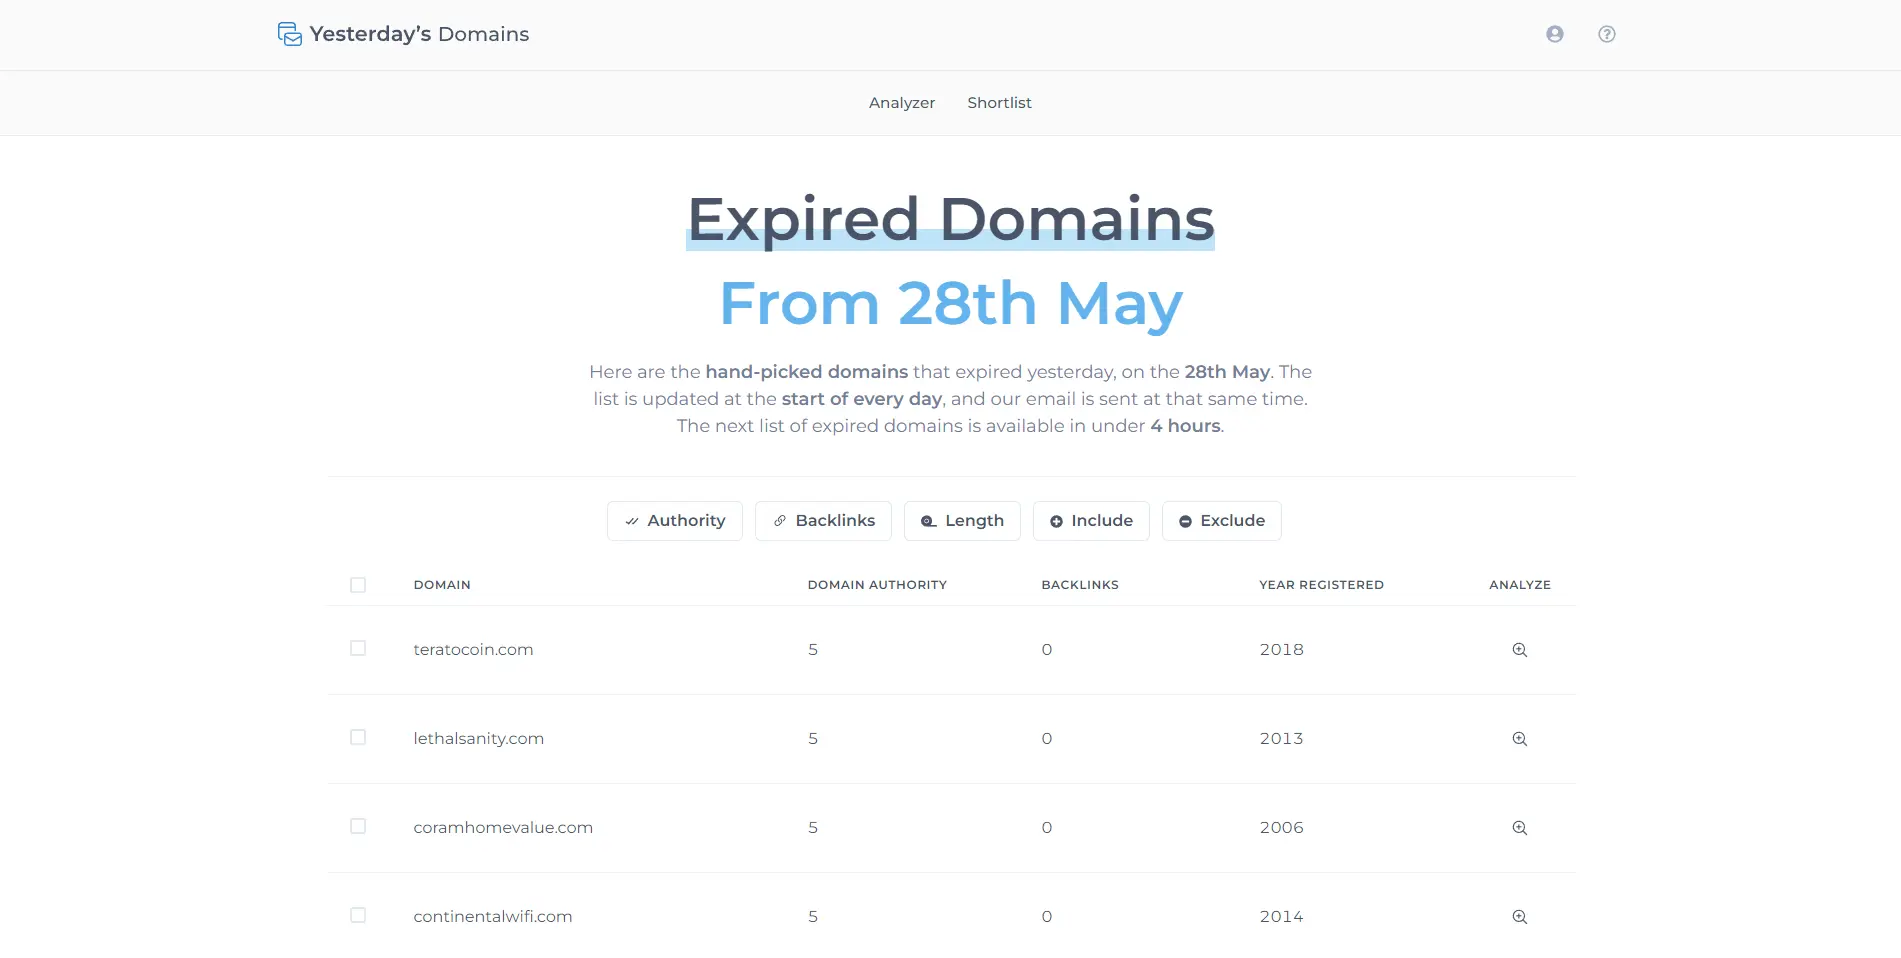 Yesterday's Domains